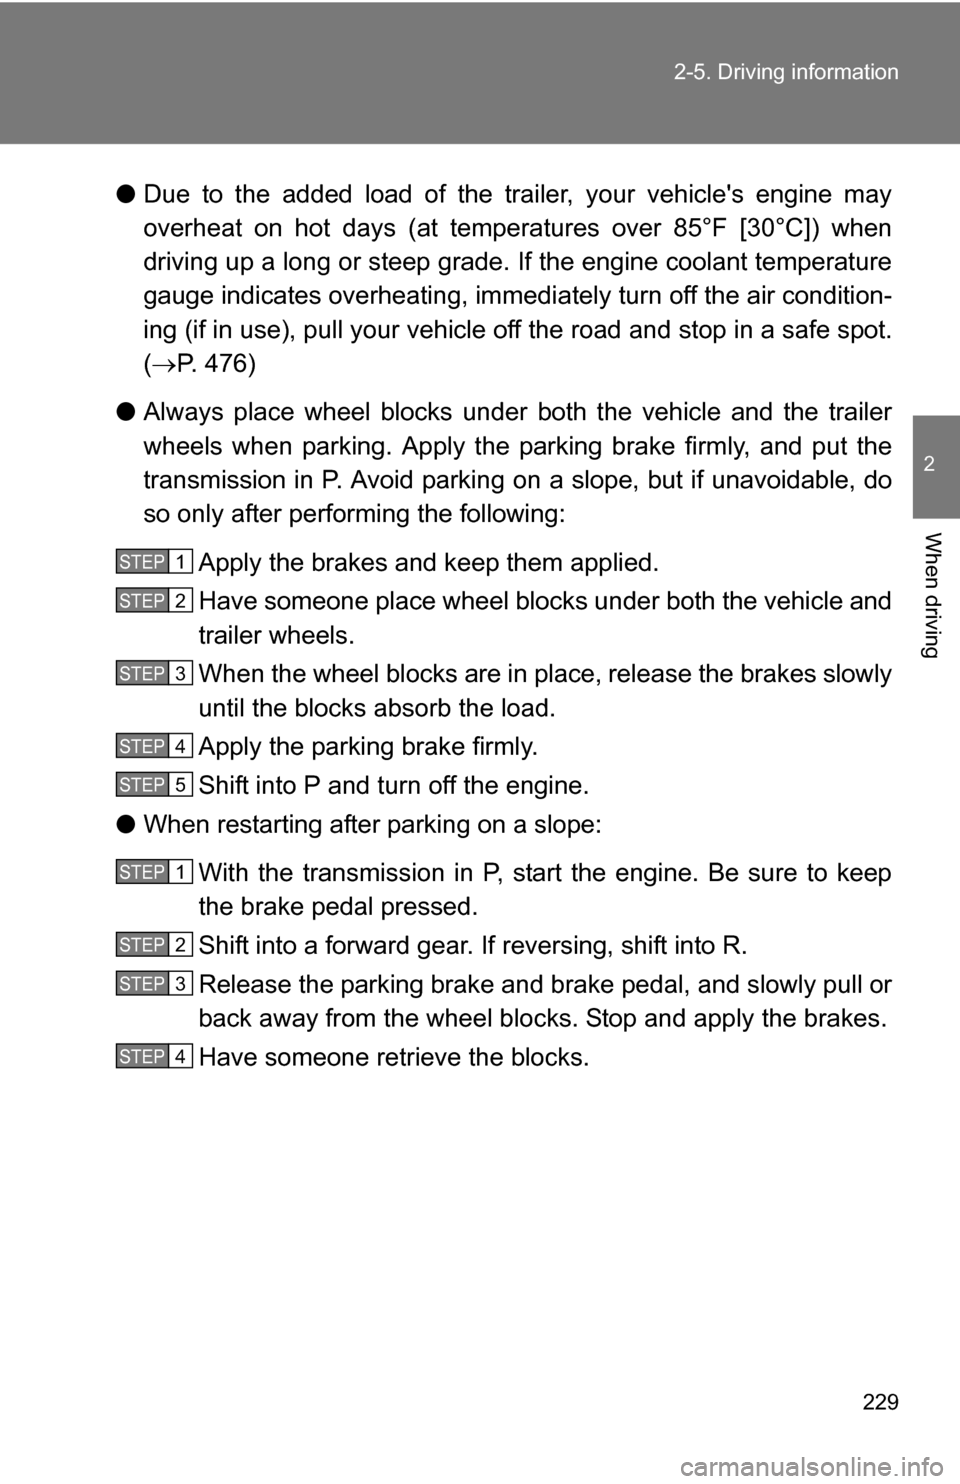 TOYOTA RAV4 2012 XA30 / 3.G Owners Manual 229
2-5. Driving information
2
When driving
●
Due to the added load of the trailer, your vehicles engine may
overheat on hot days (at temperatures over 85°F [30°C]) when
driving up a long or stee